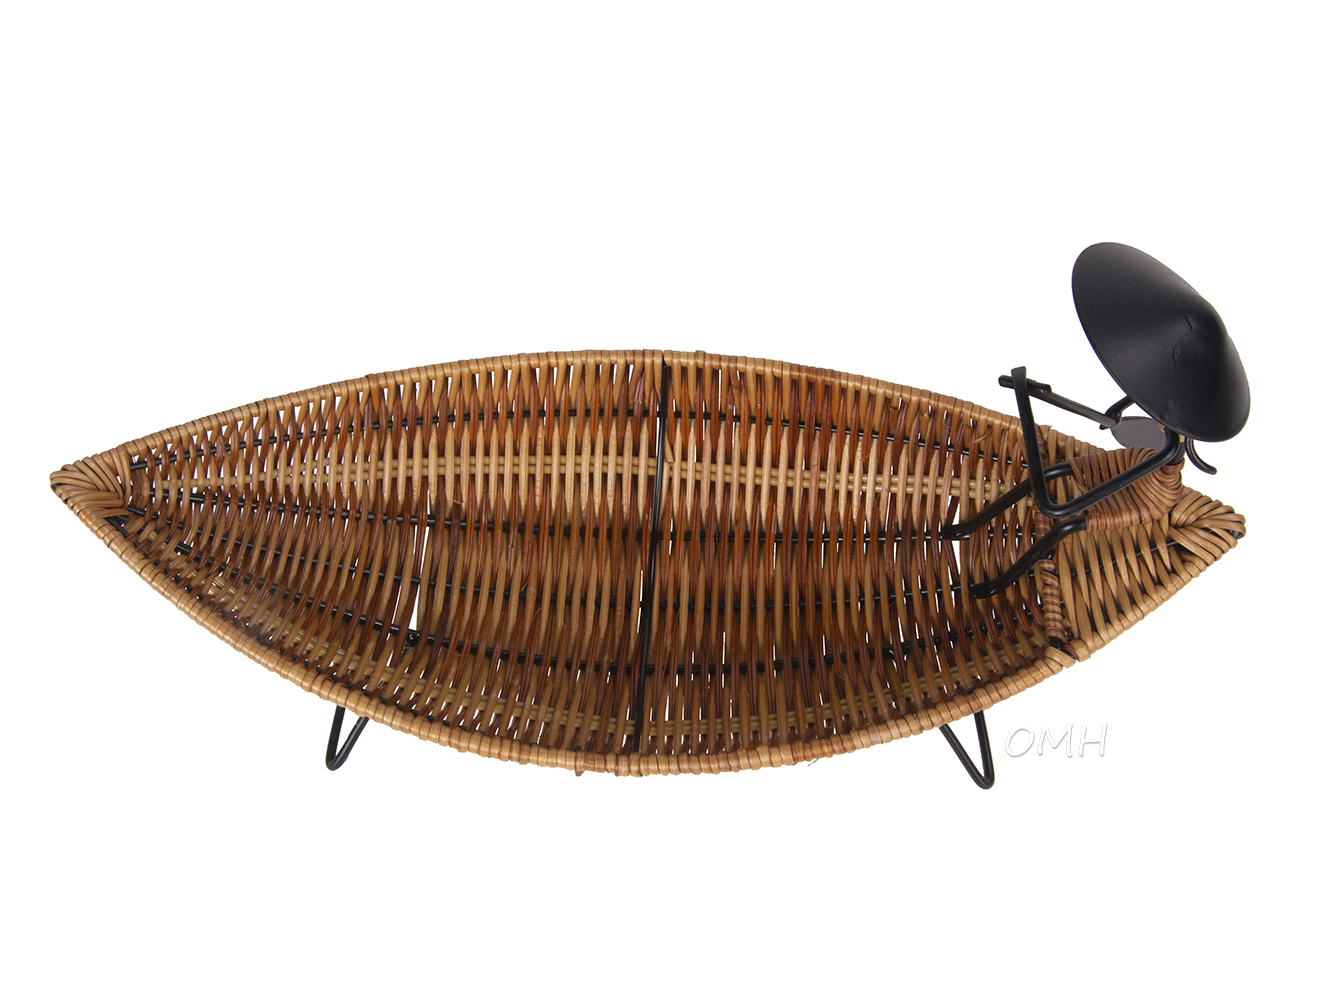 MS015 Asian Style Tranquility Boat Basket MS015L01.jpg